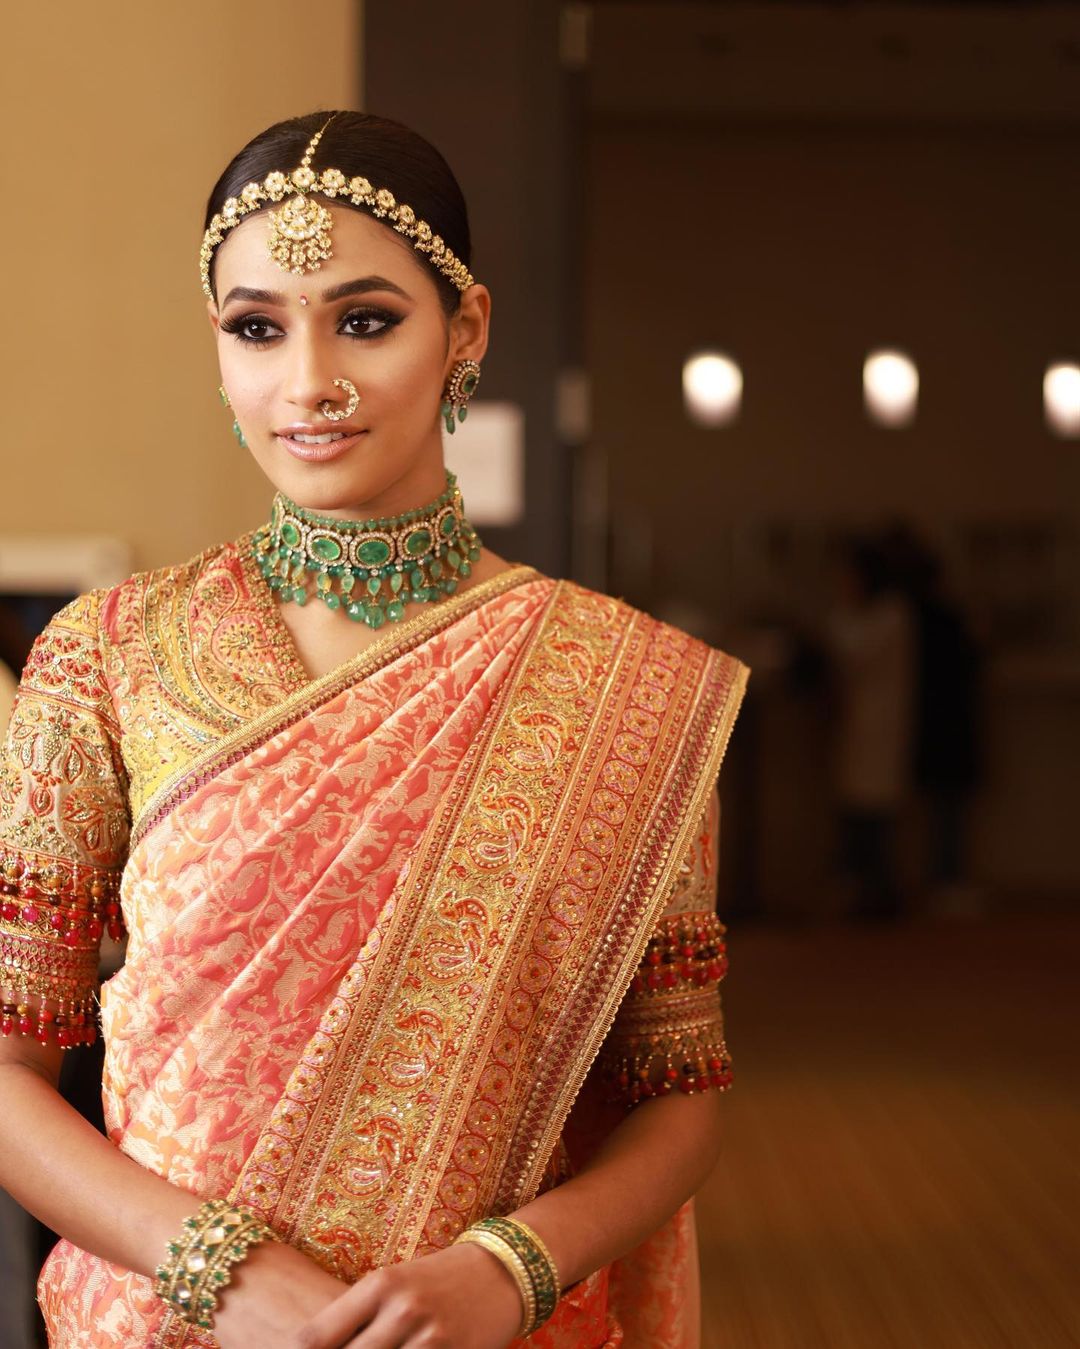 The South Indian Bridal Look - K4 Fashion